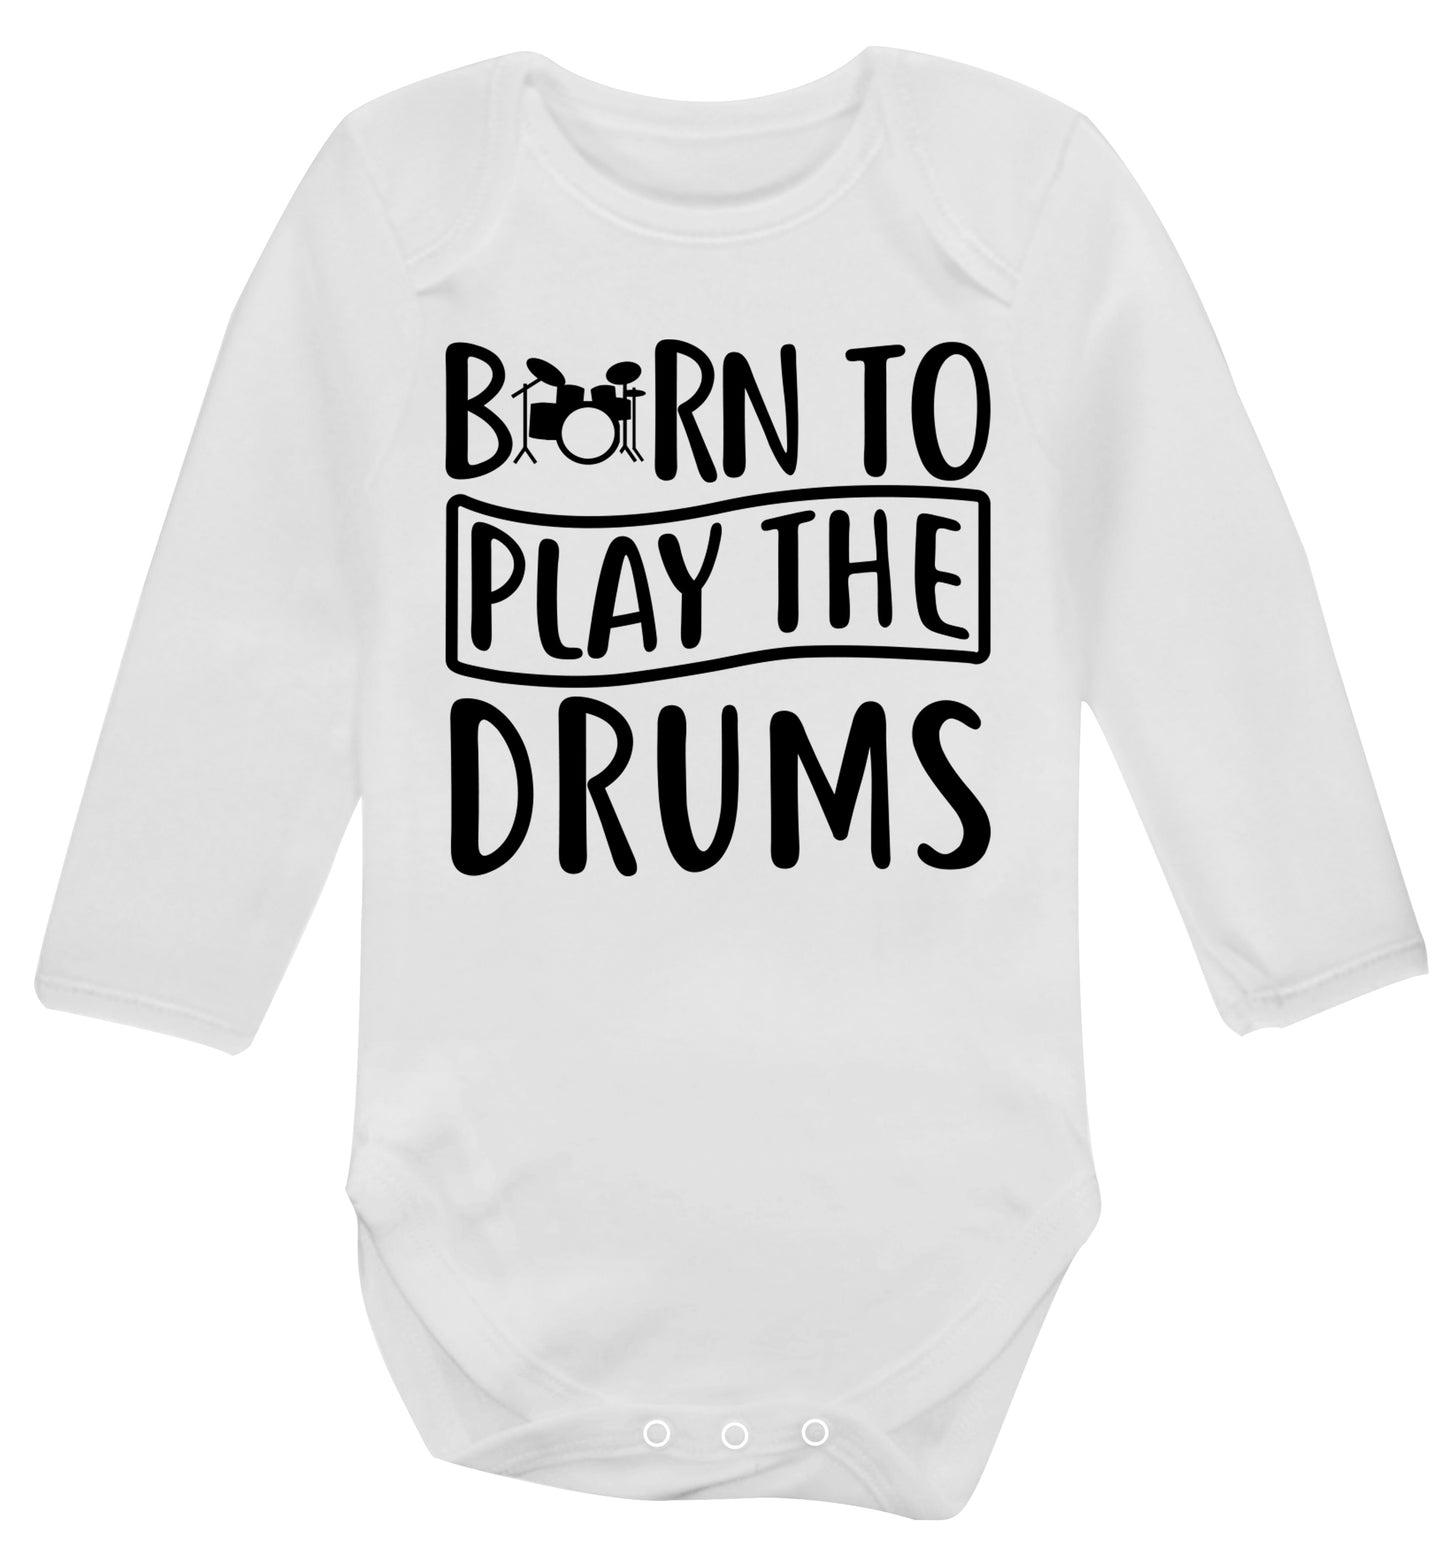 Born to play the drums Baby Vest long sleeved white 6-12 months